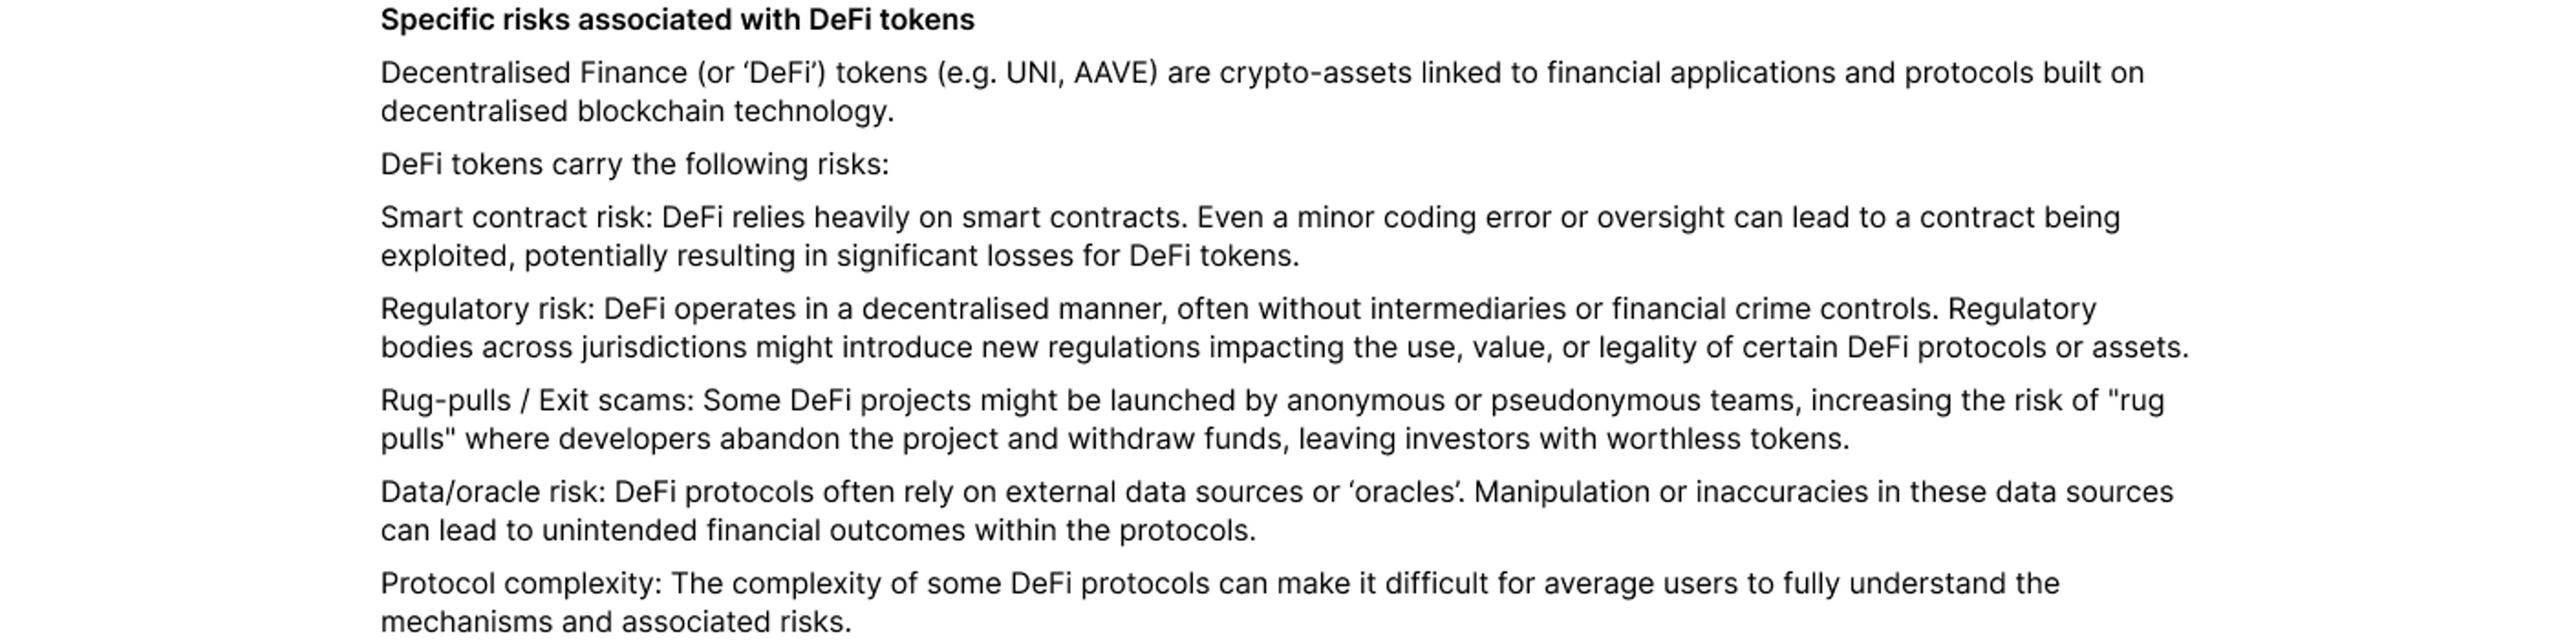 Specific risks associated with DeFi tokens  Decentralised Finance (or ‘DeFi’) tokens (e.g. UNI, AAVE) are crypto-assets linked to financial applications and protocols built on decentralised blockchain technology.   DeFi tokens carry the following risks:  